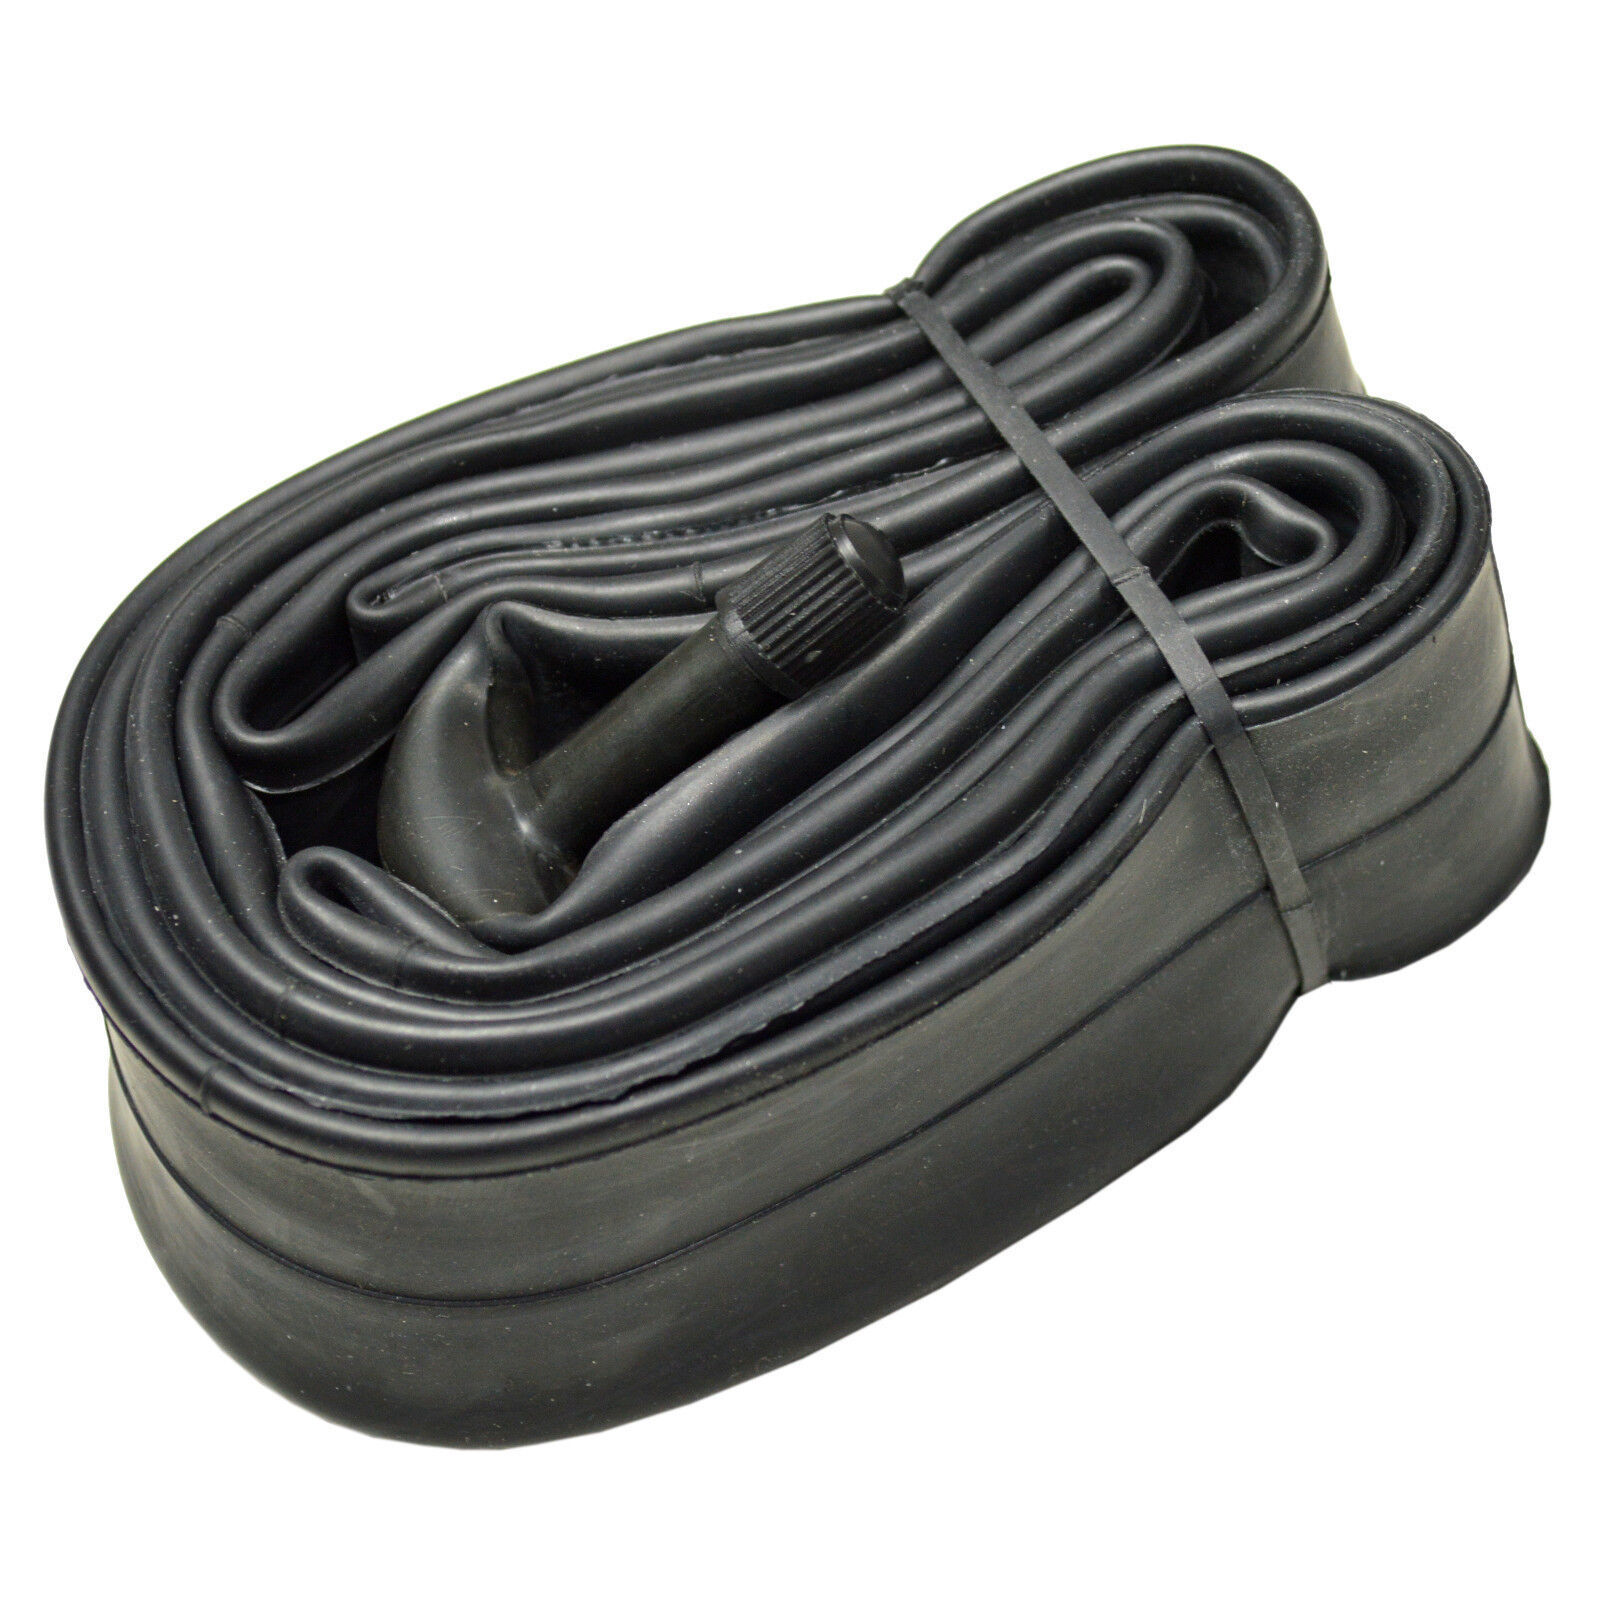 Primary image for 26" Bike Bicycle Tire Inner Tube 26" x 1.75-2.125 Schrader Valve